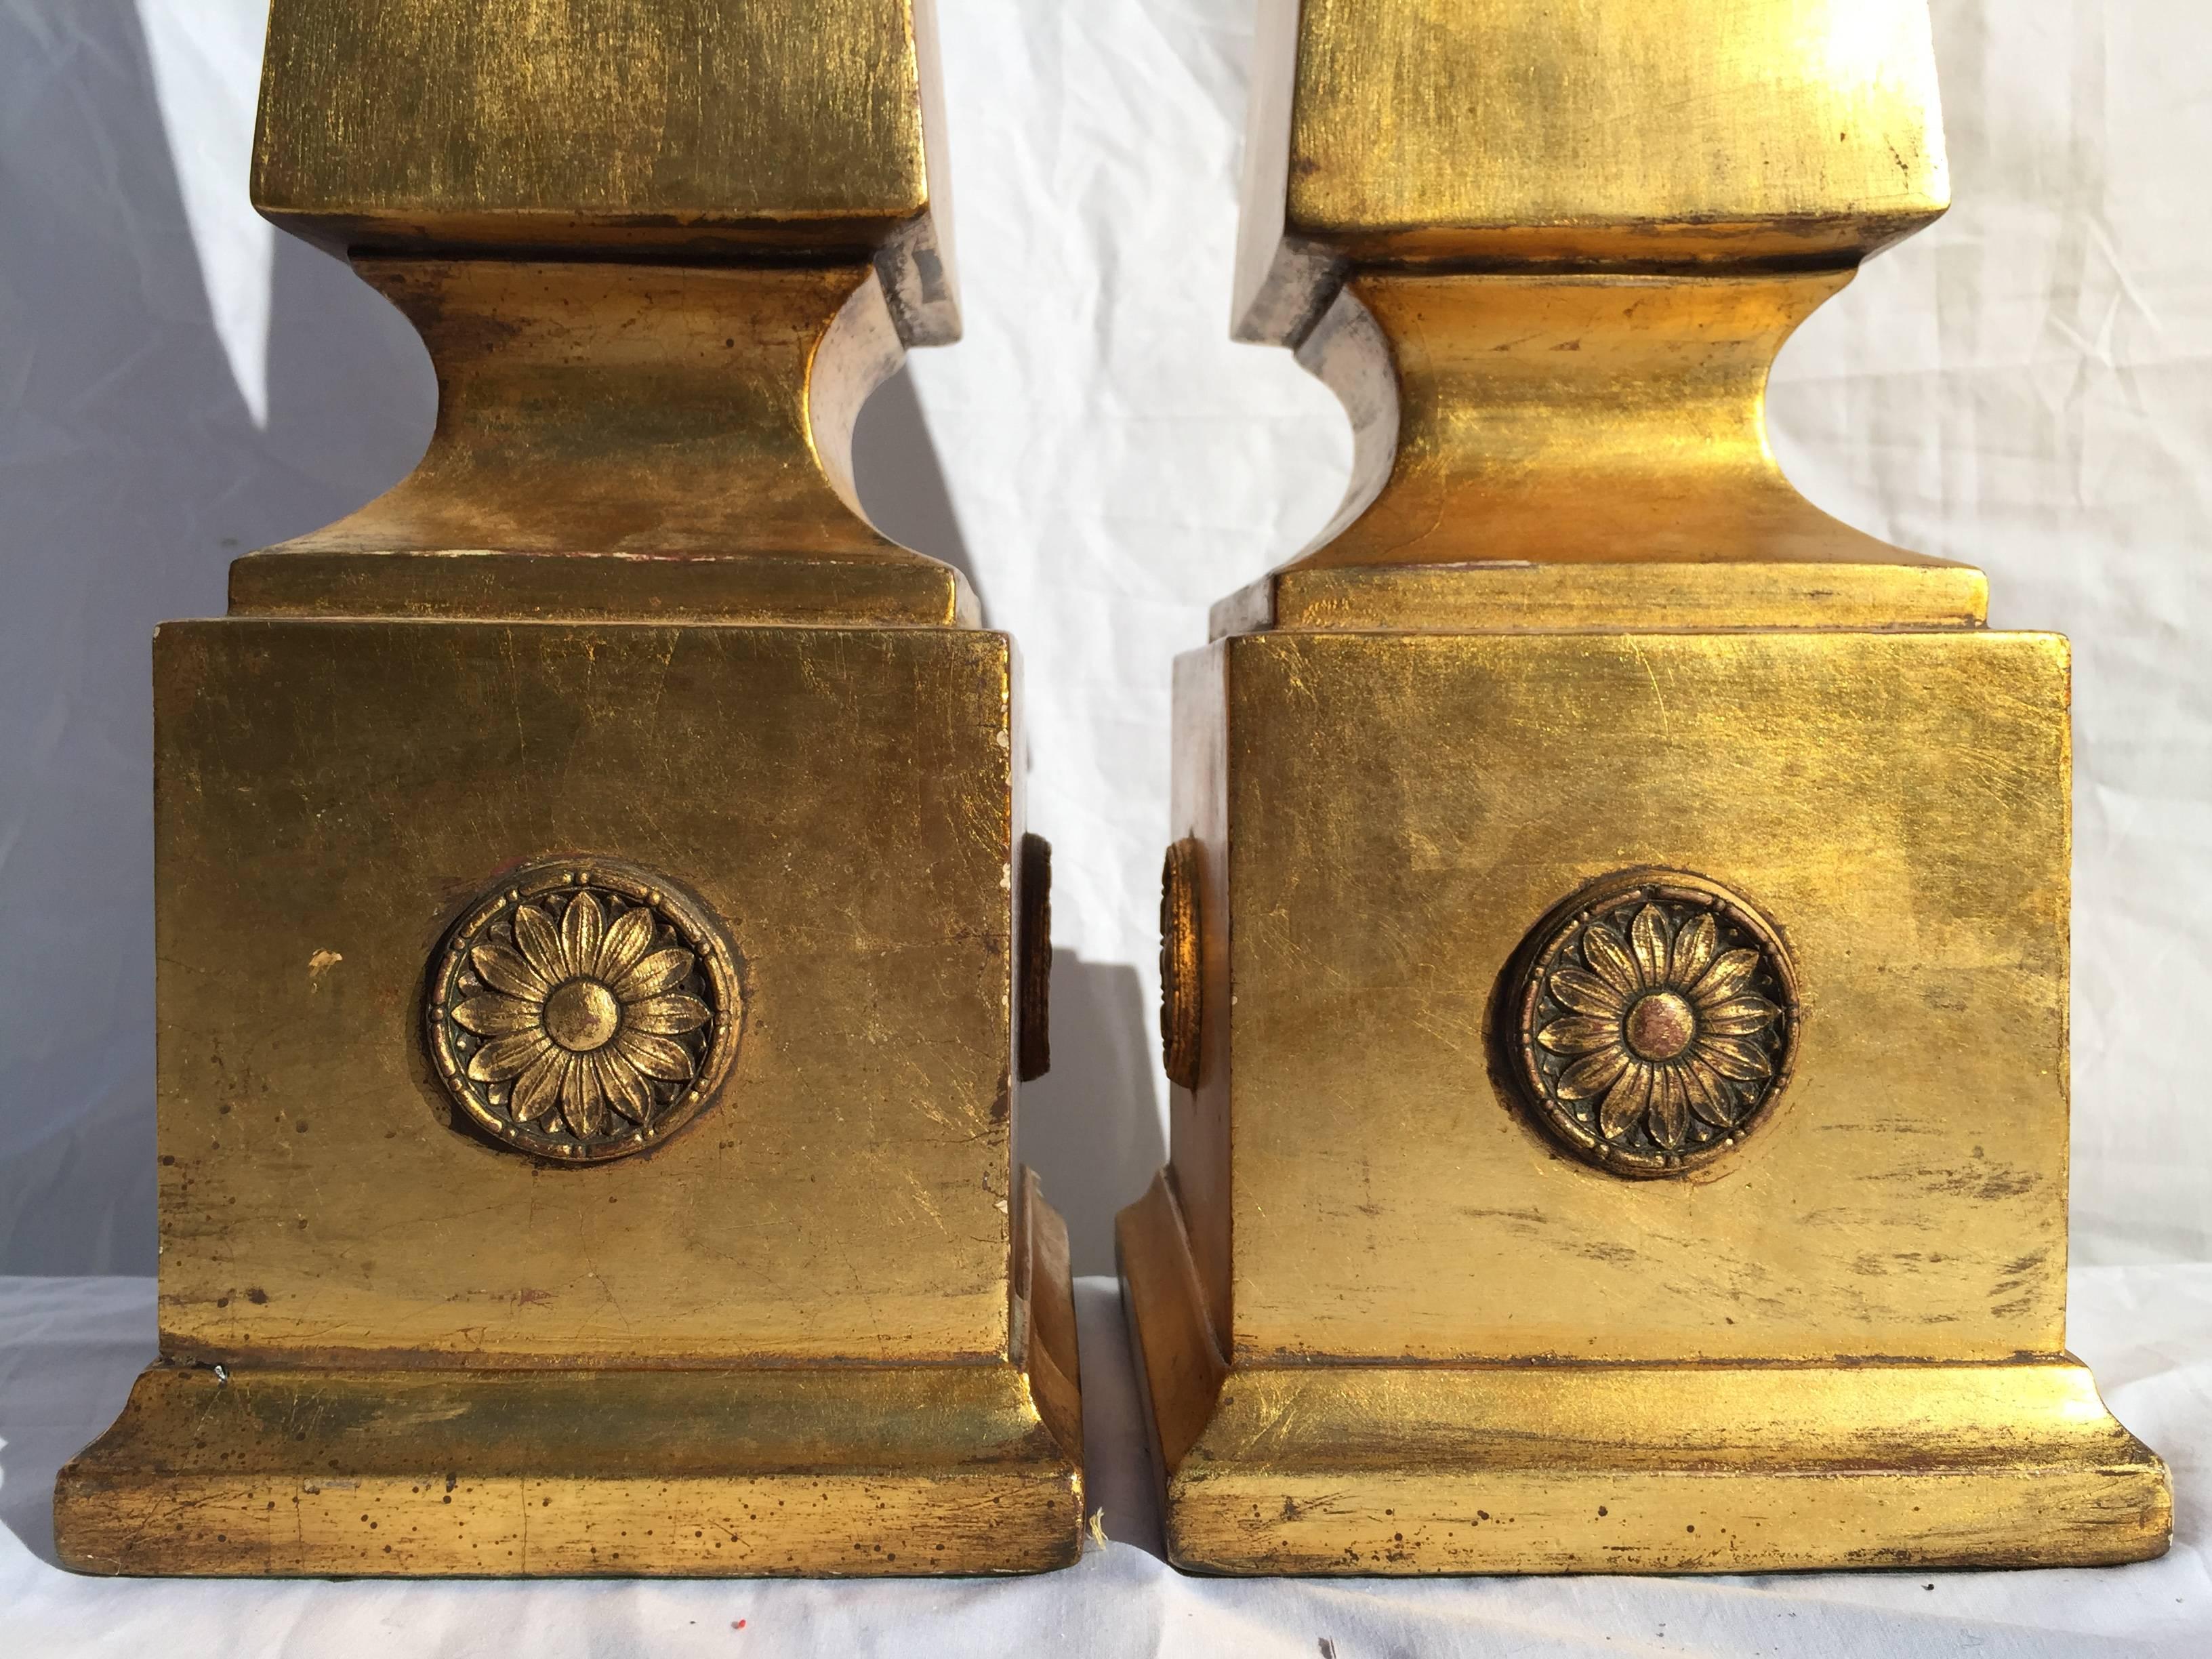 Plaster Pair of Monumental and Chic Gilt Obelisk Form Lamps with Sunflower Medallions